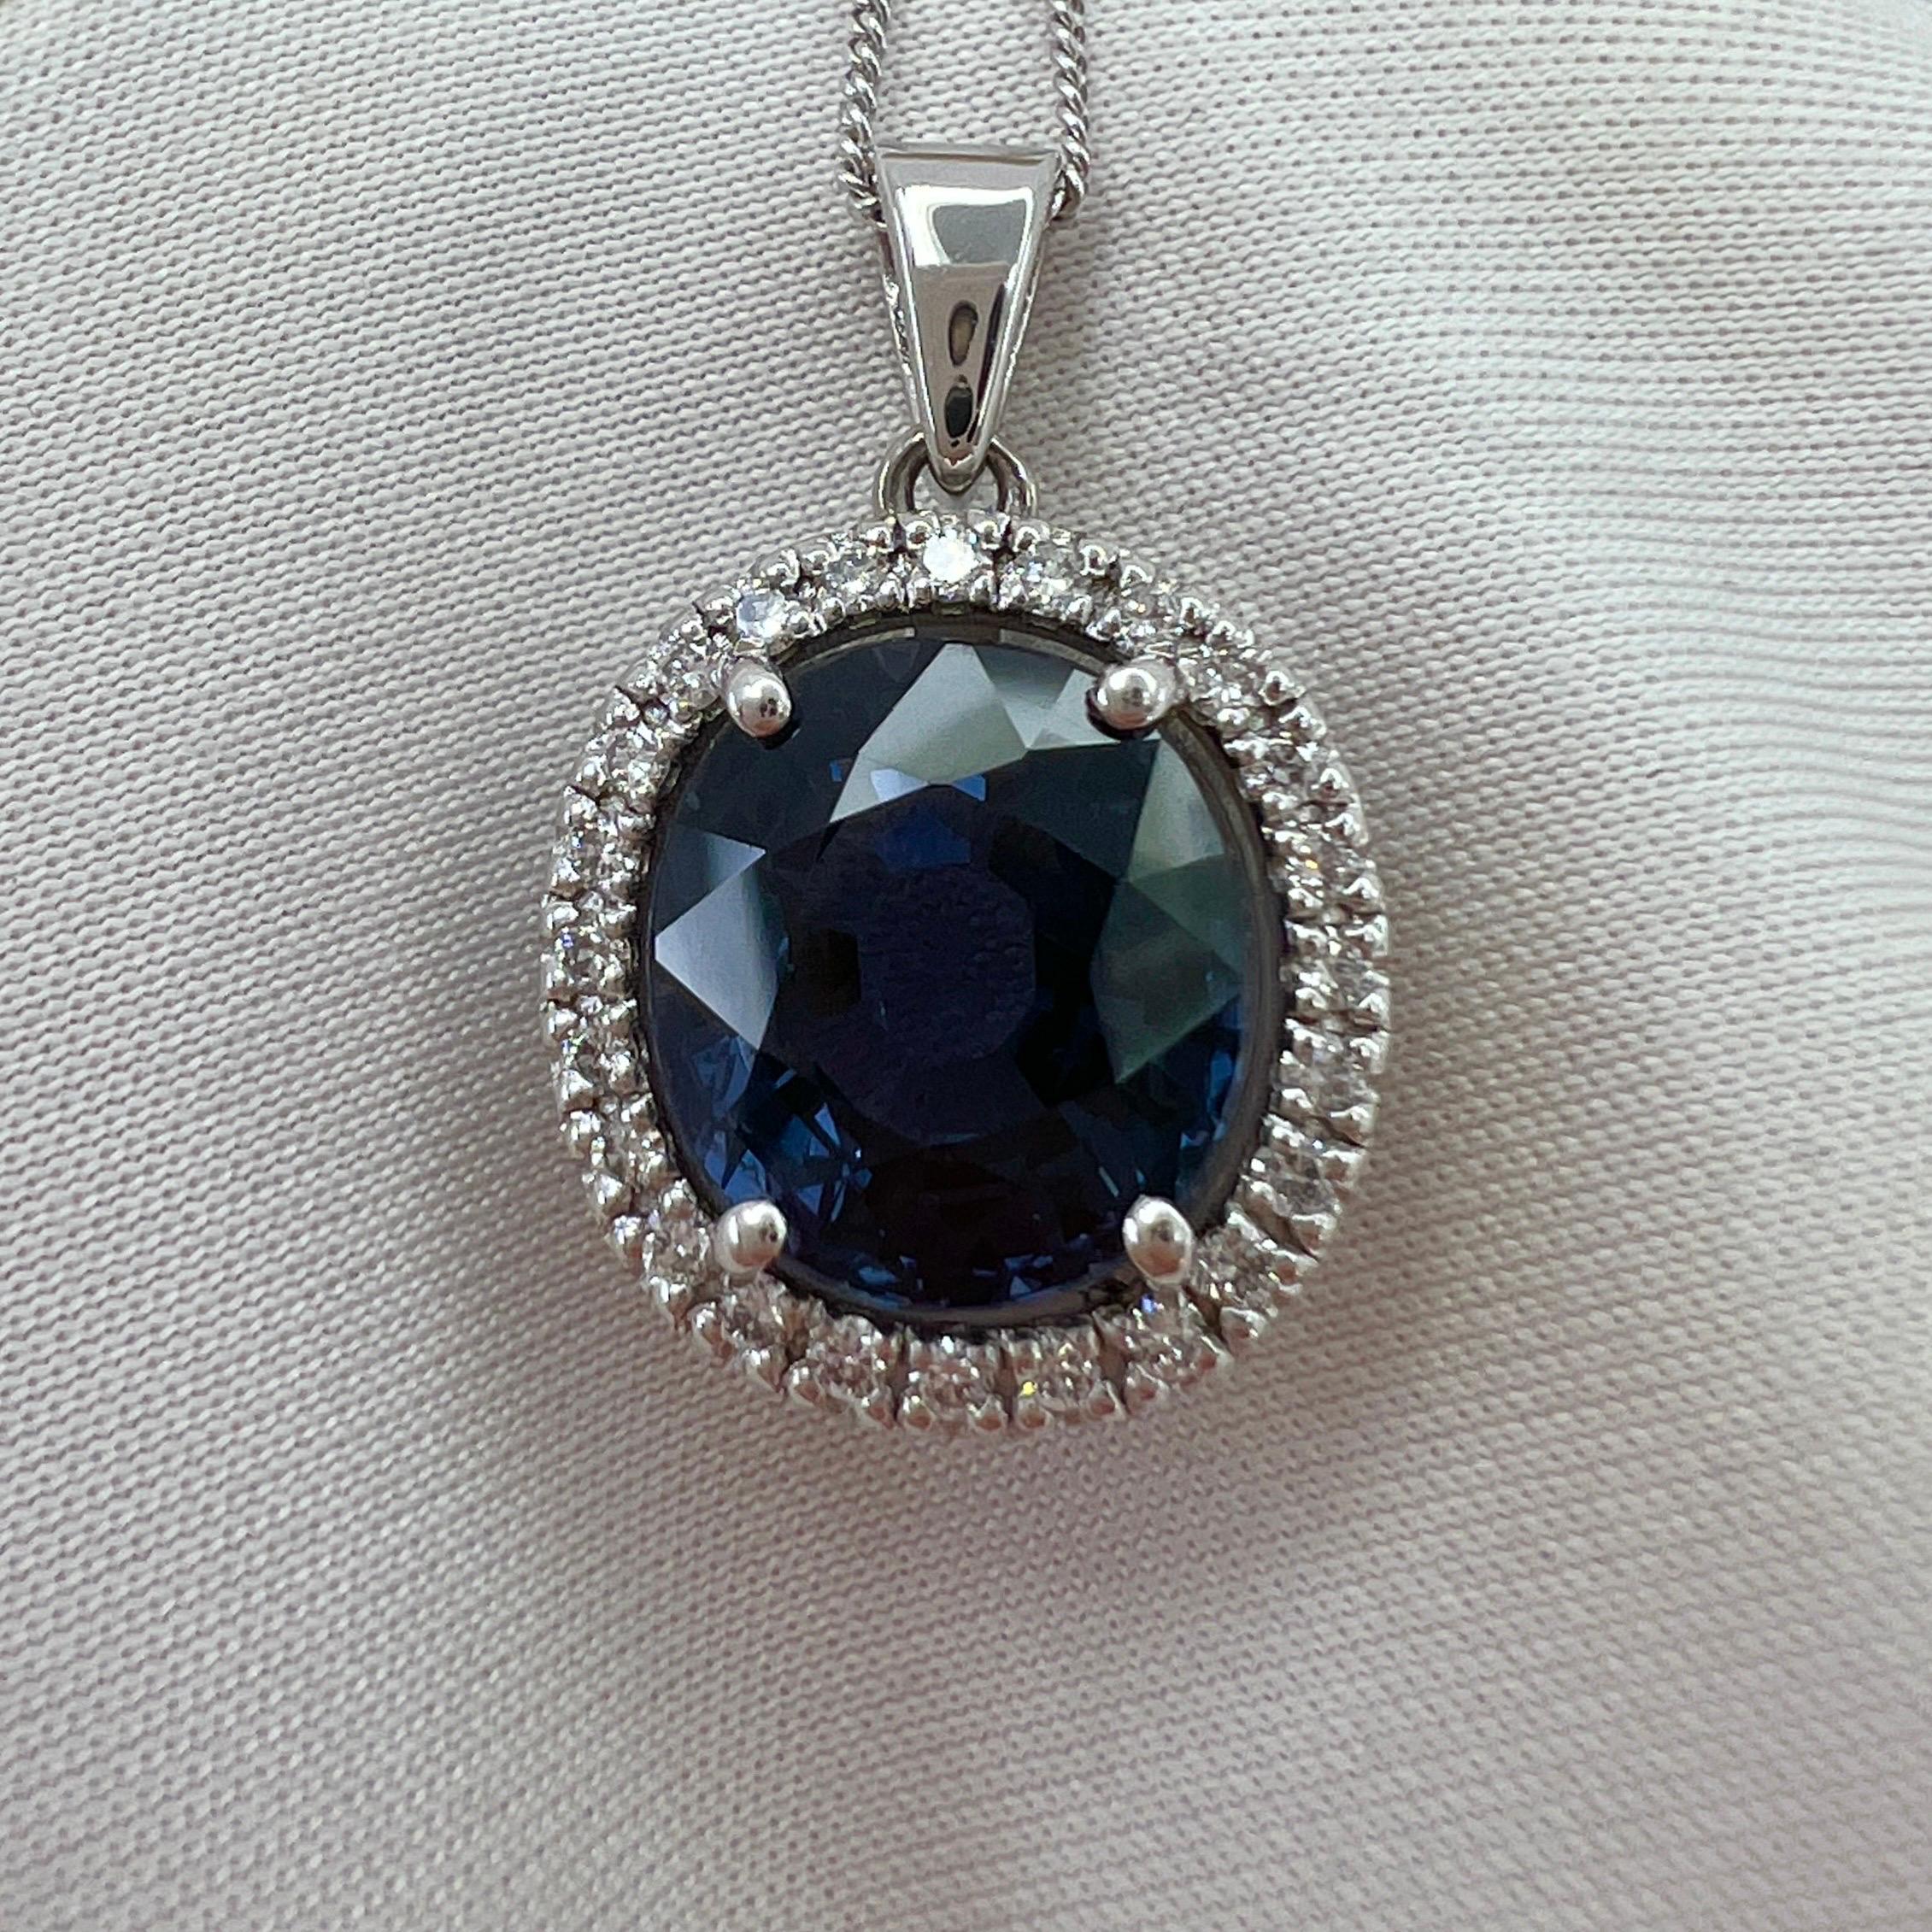 Rare GIA Certified Colour Change Spinel & Diamond 18k White Gold Halo Pendant Necklace.

Large 5.39 Carat centre spinel with a rare colour change effect, changes colour from violetish blue to purple depending on the light it is viewed. A unique and